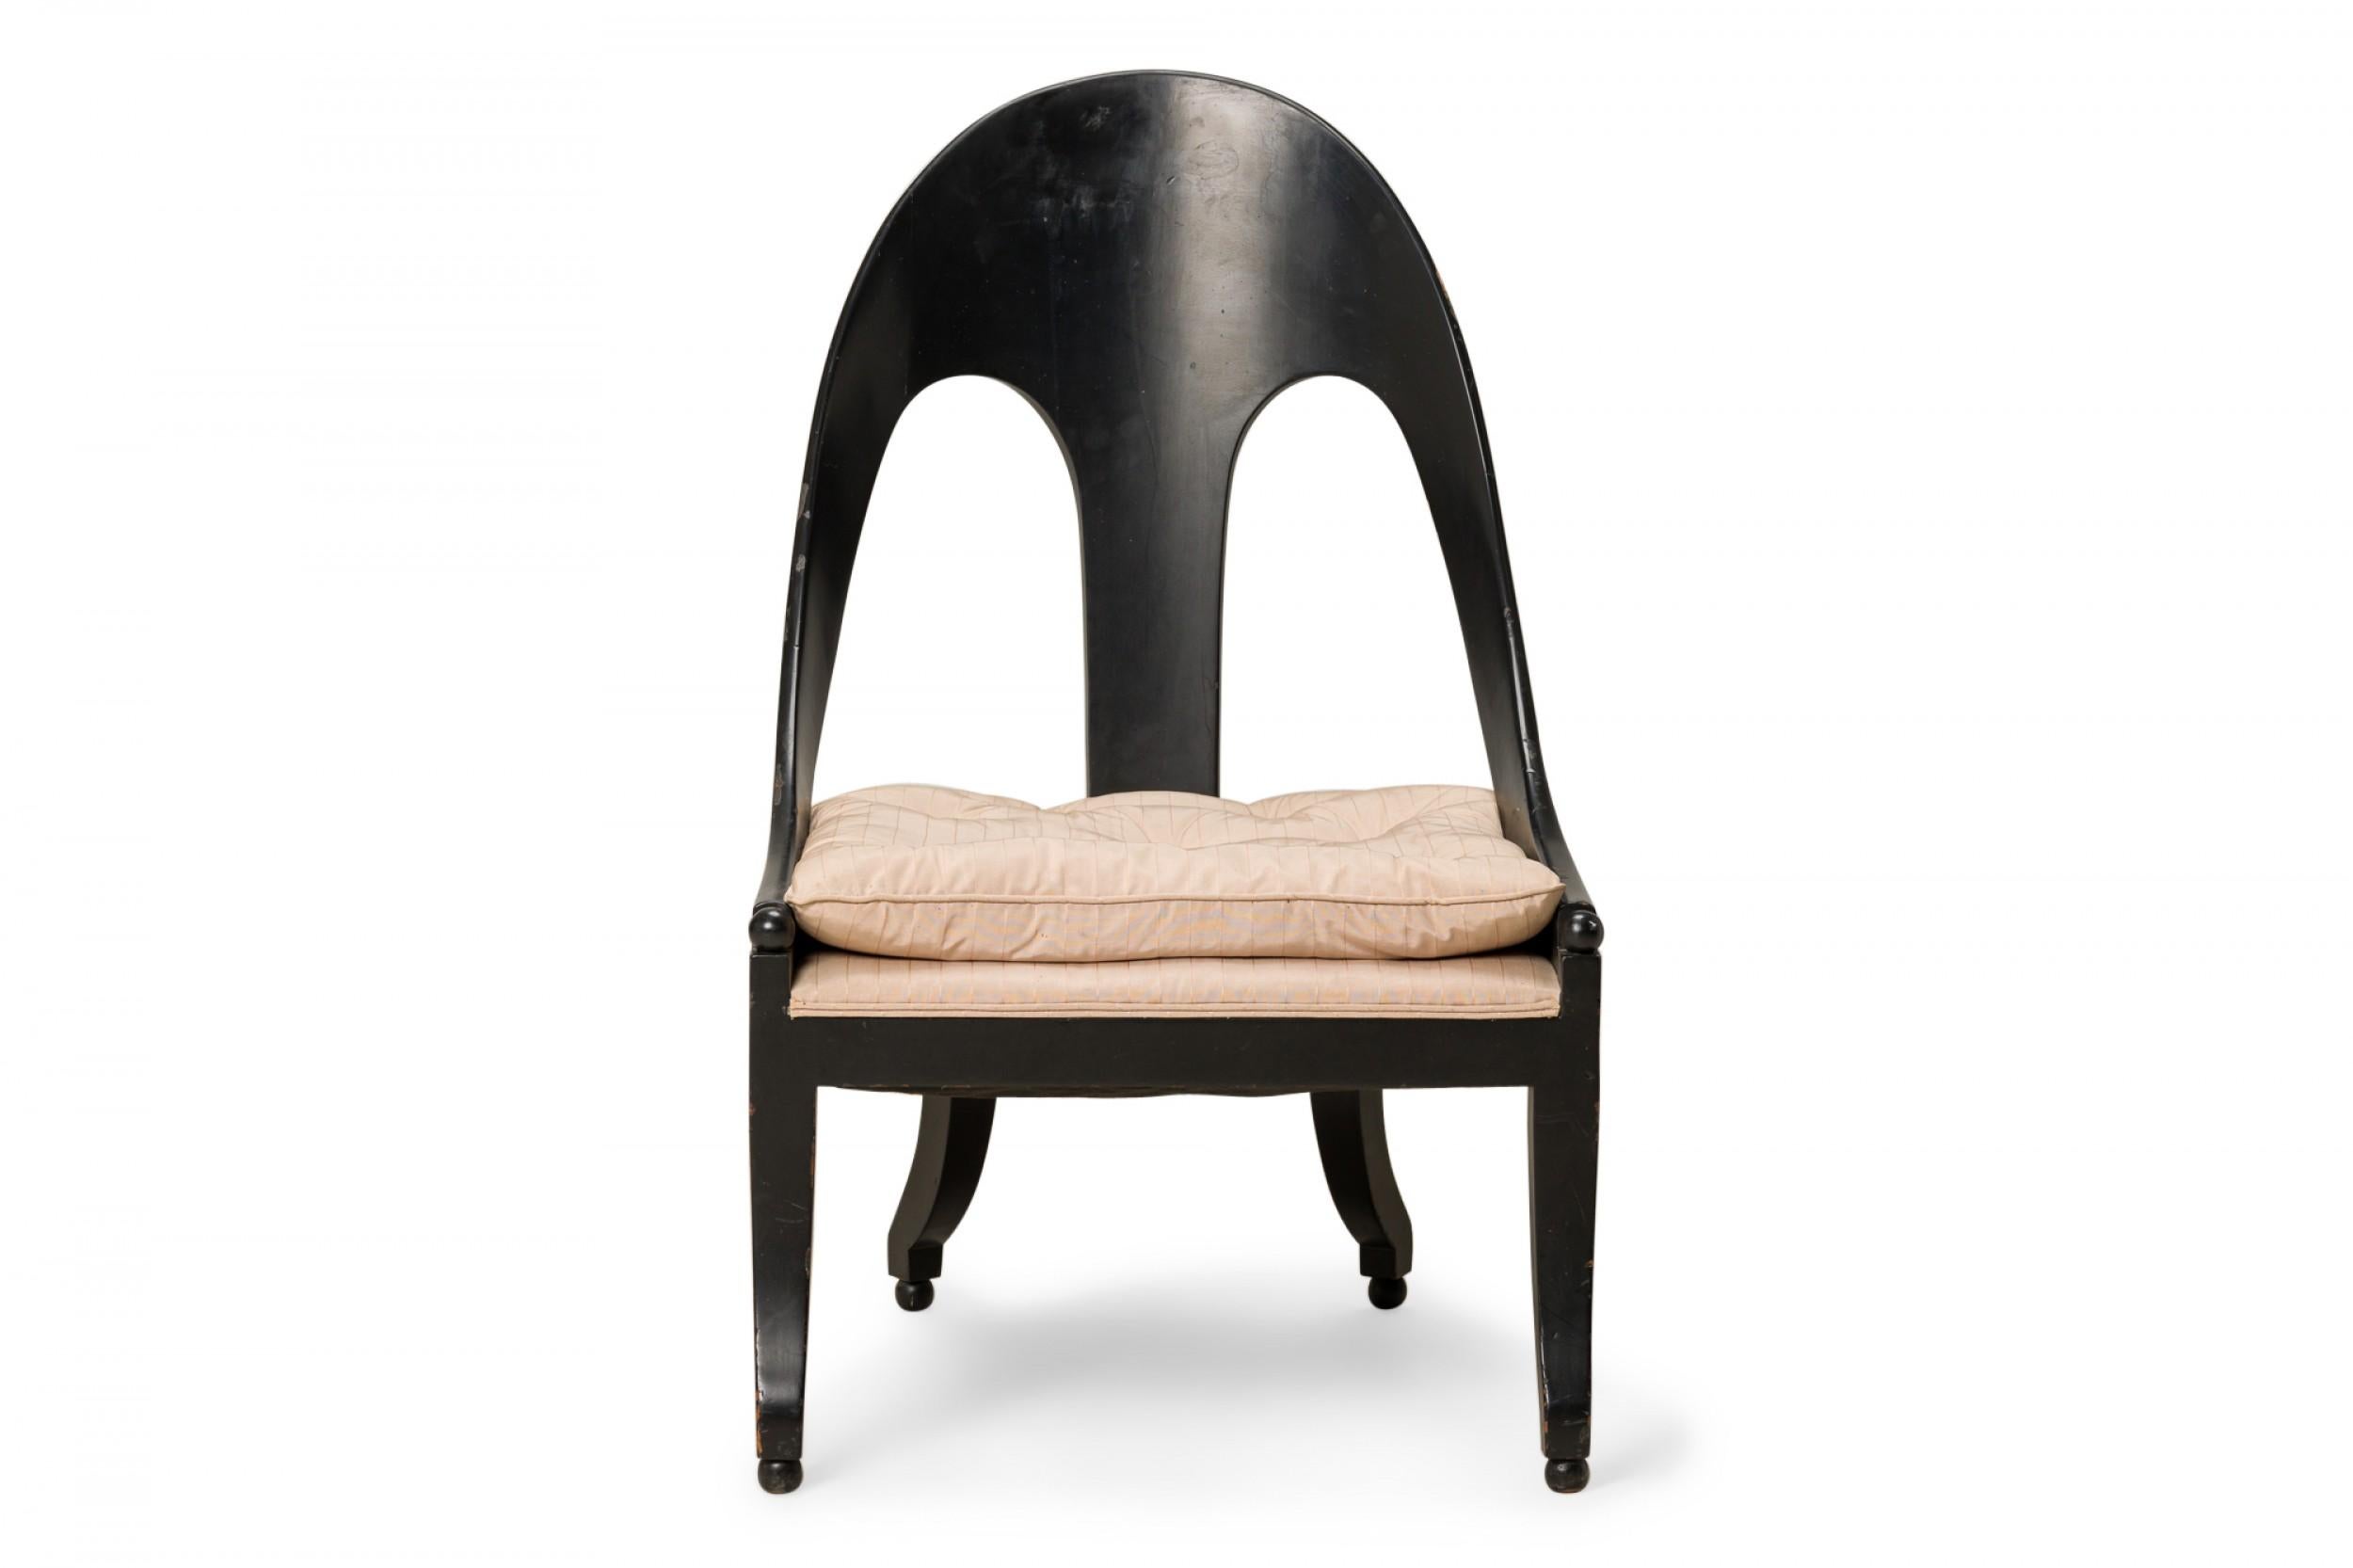 American mid-century spoon back side / pull up chair with a black lacquered wooden frame and a button-tufted rose fabric upholstered seat, resting on four square curved legs ending in ball feet.